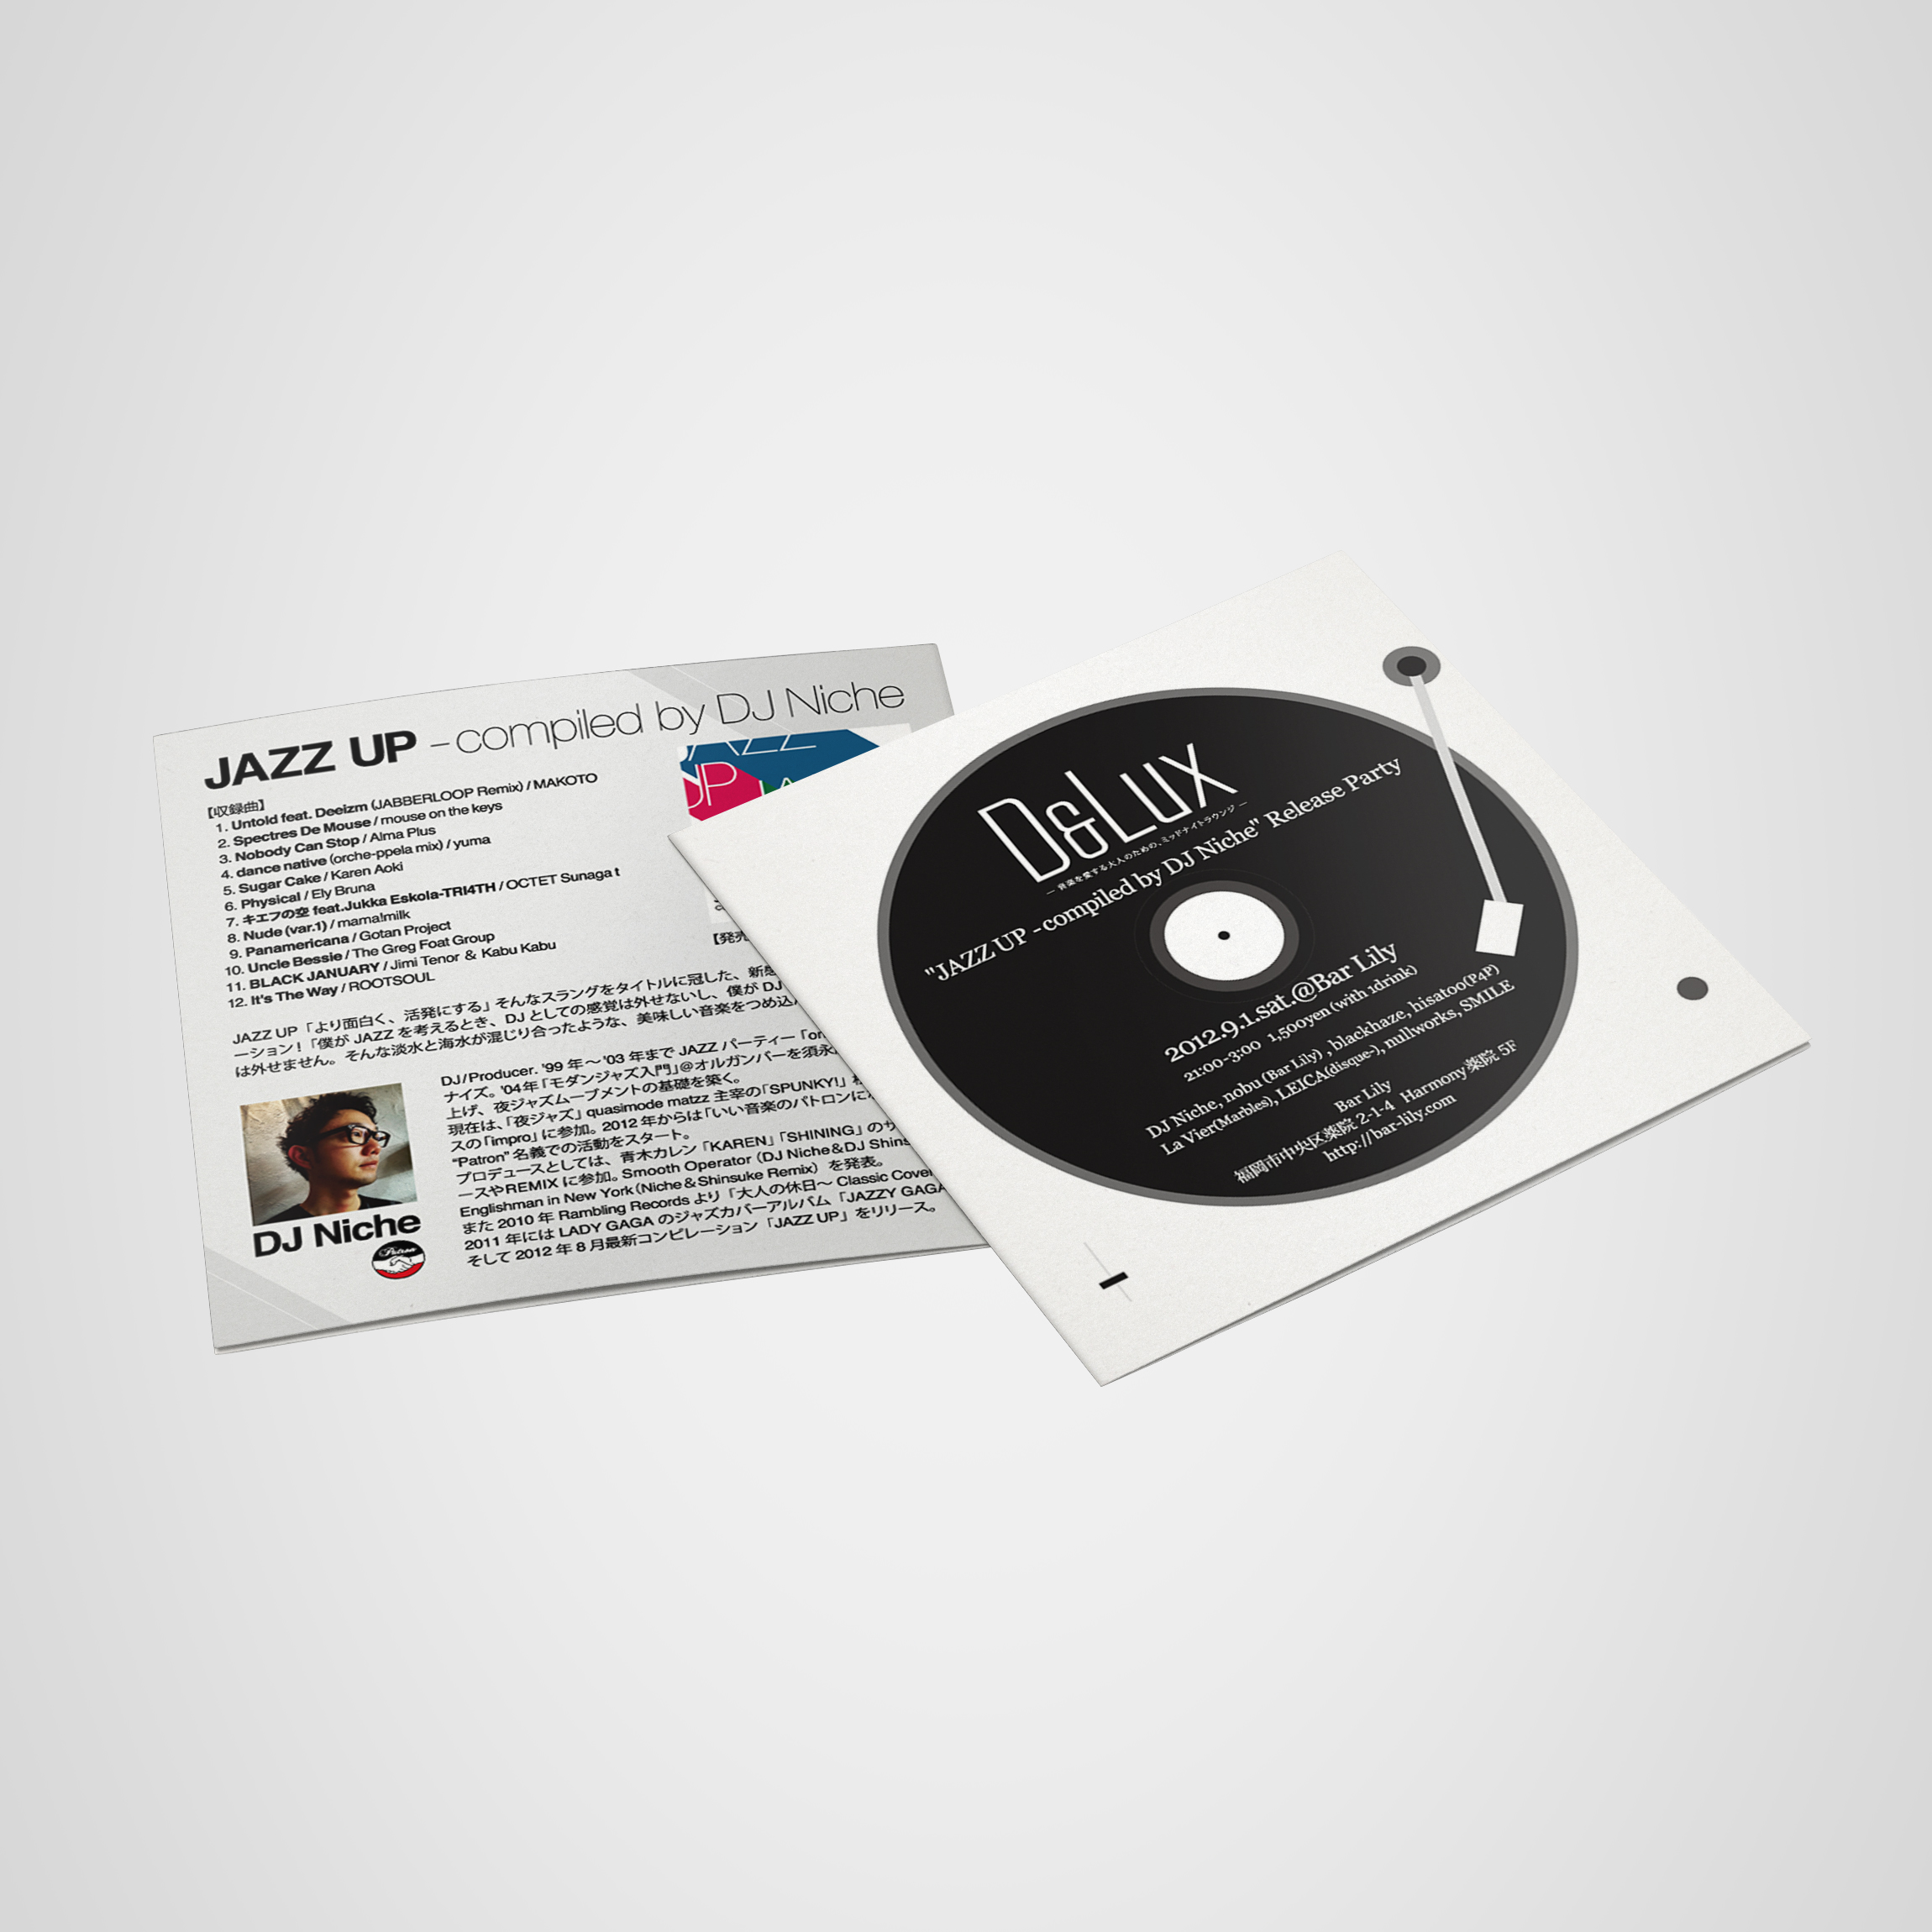 D&Lux “JAZZ UP -compiled by DJ Niche” Release Party